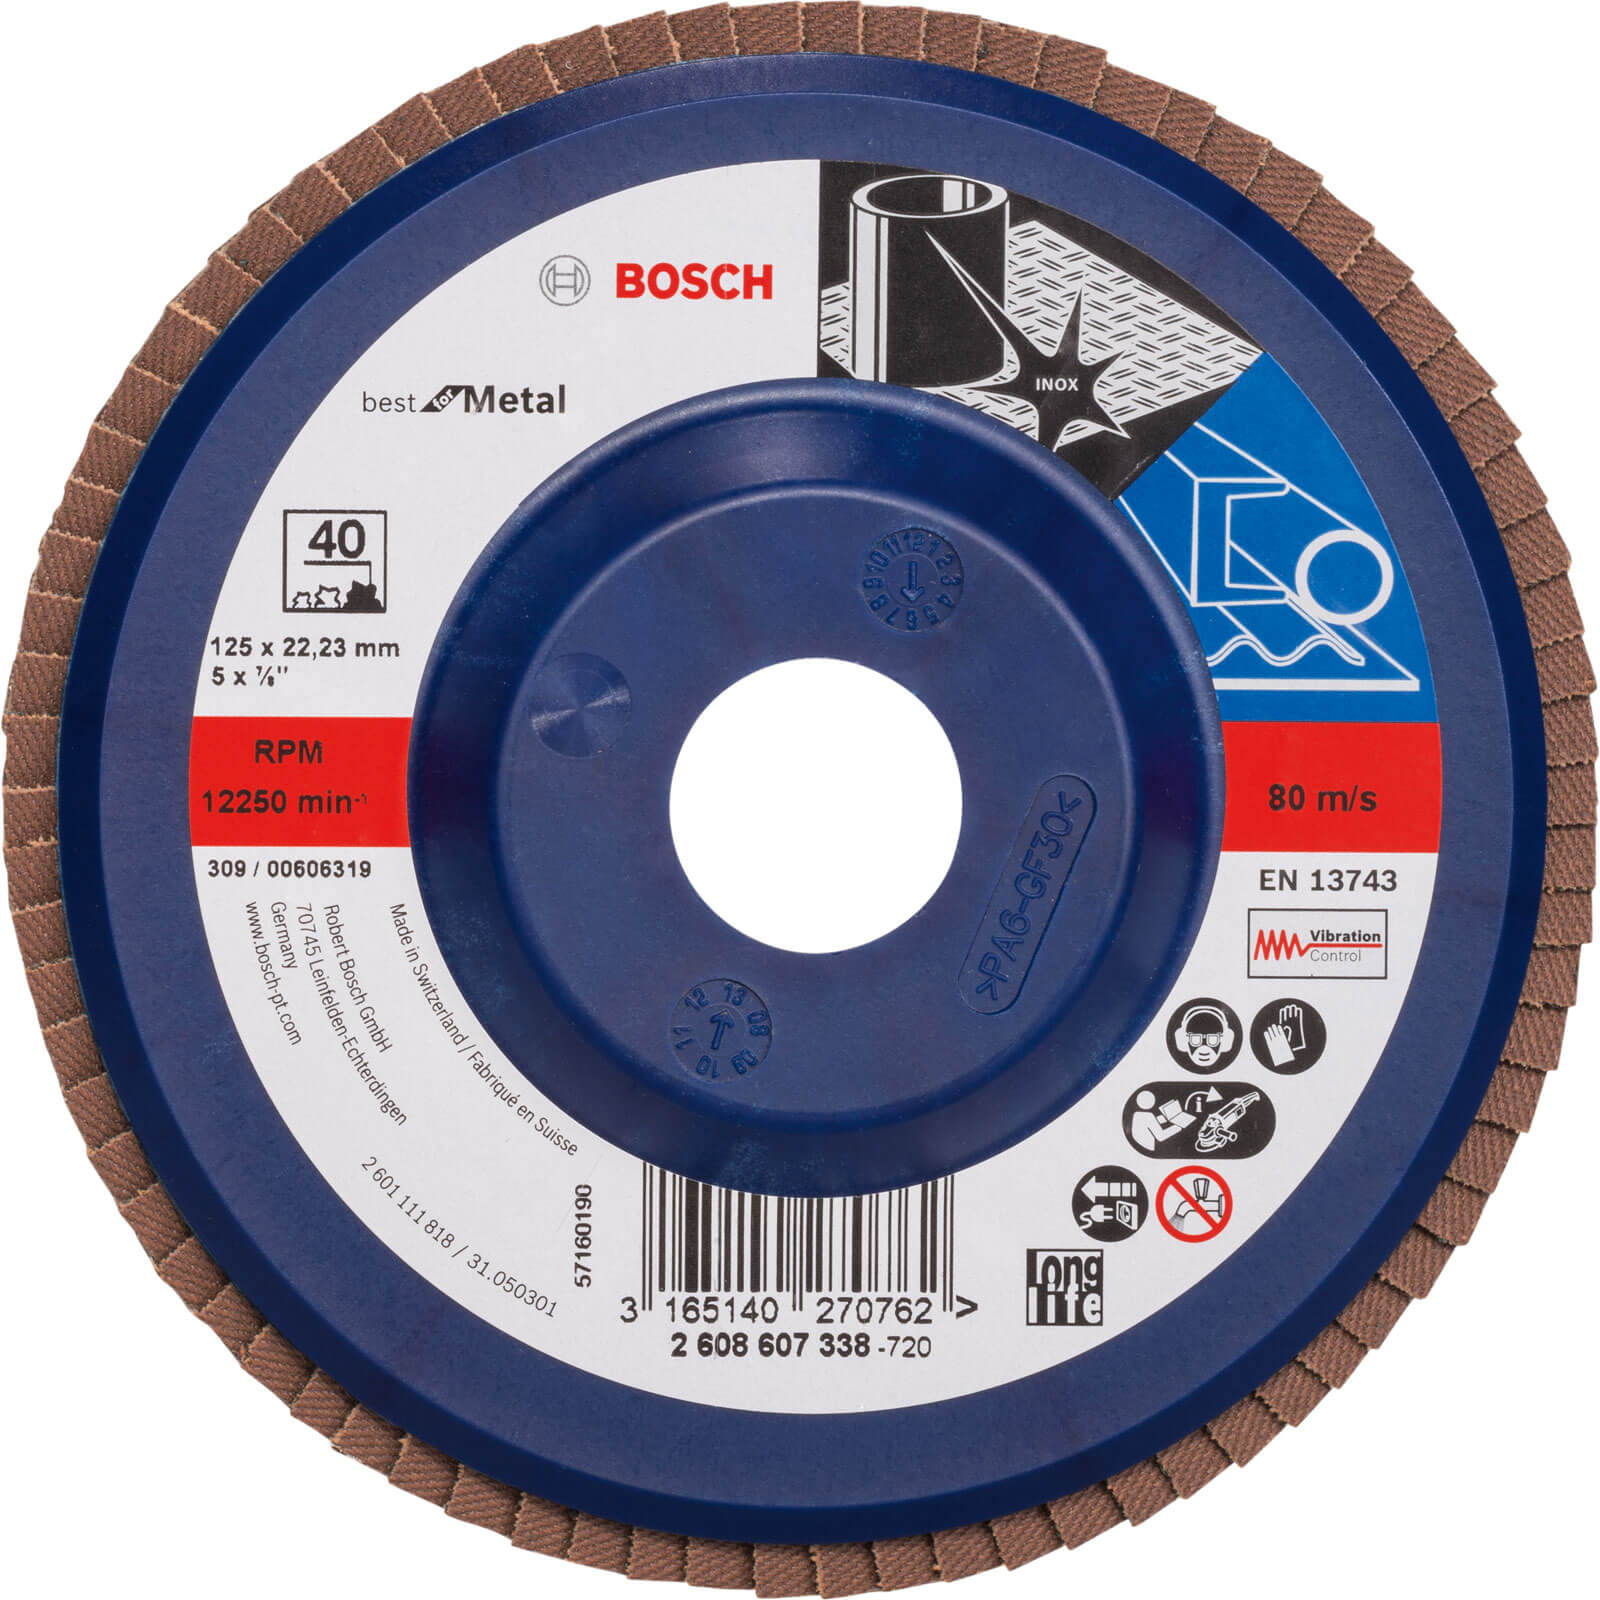 Photos - Cutting Disc Bosch X571 Best for Metal Straight Flap Disc 115mm 60g Pack of 1 260860732 